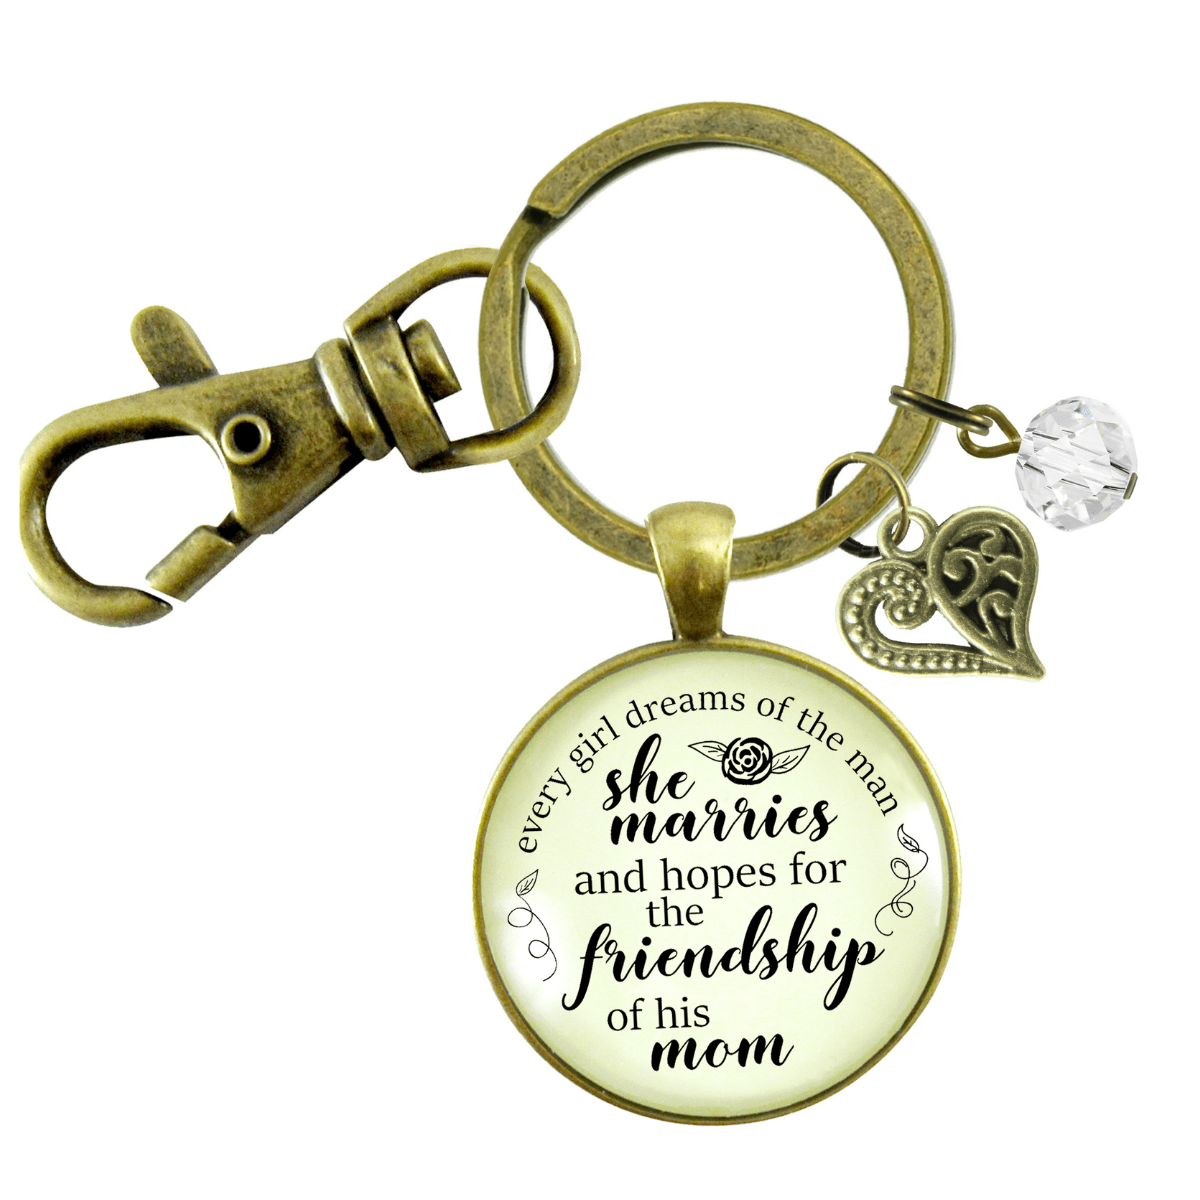 To Her Mother in Law Keychain I Dreamed of Friendship With You Wedding Day Gift Jewelry - Gutsy Goodness Handmade Jewelry;To Her Mother In Law Keychain I Dreamed Of Friendship With You Wedding Day Gift Jewelry - Gutsy Goodness Handmade Jewelry Gifts